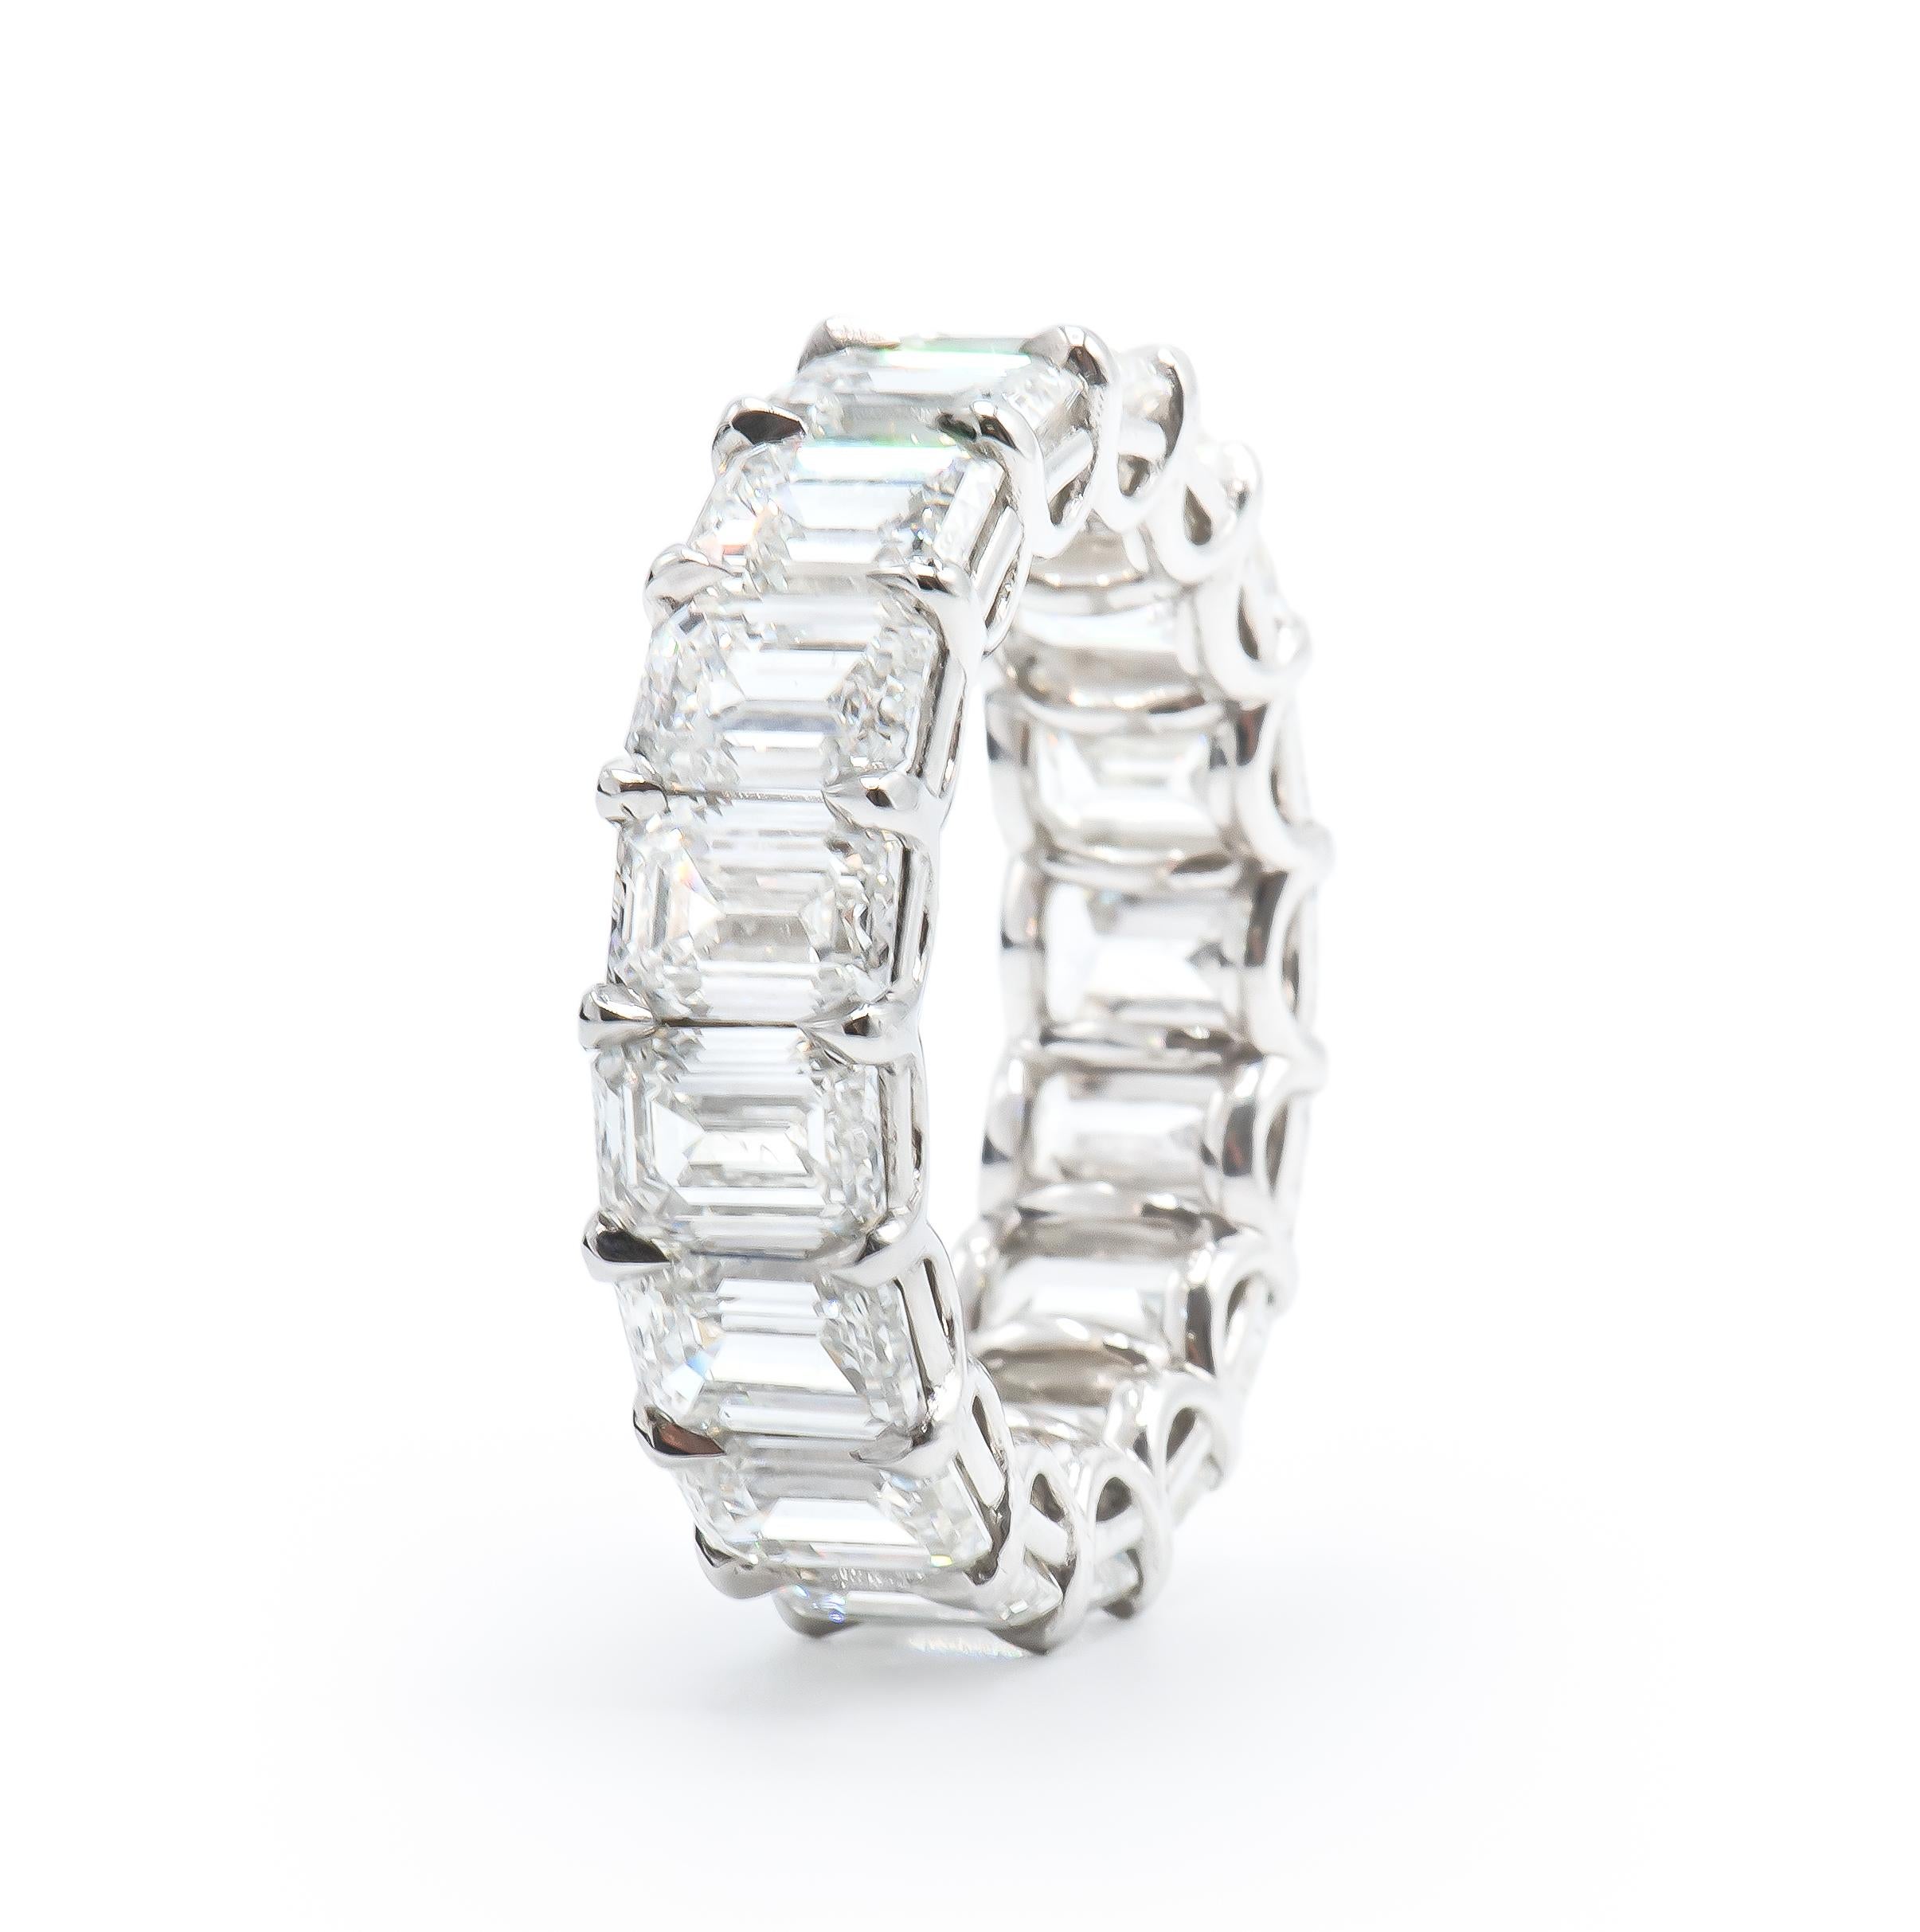 19 Elongated and perfectly matched Emerald Cut Diamond make up this Eternity Band.
7.77 Carats.
G-H, VS Quality.
Set in Platinum. Size 6.